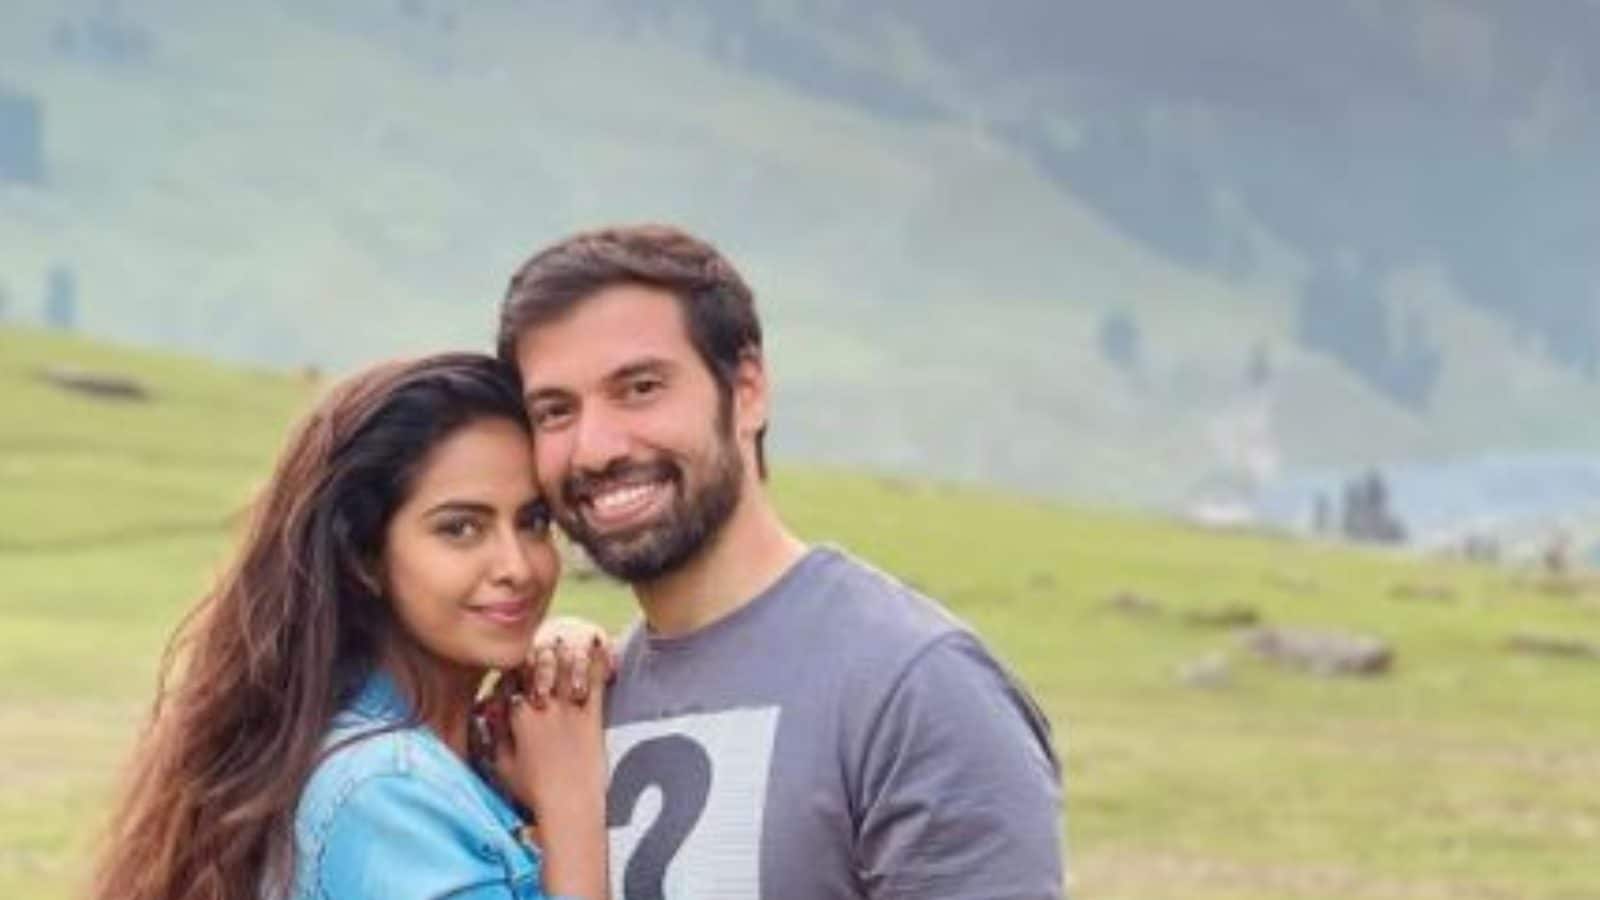 Avika Gor’s Celebration Of 2 Years With Boyfriend Milind Chandwani Is Just Too Dreamy, See Pics